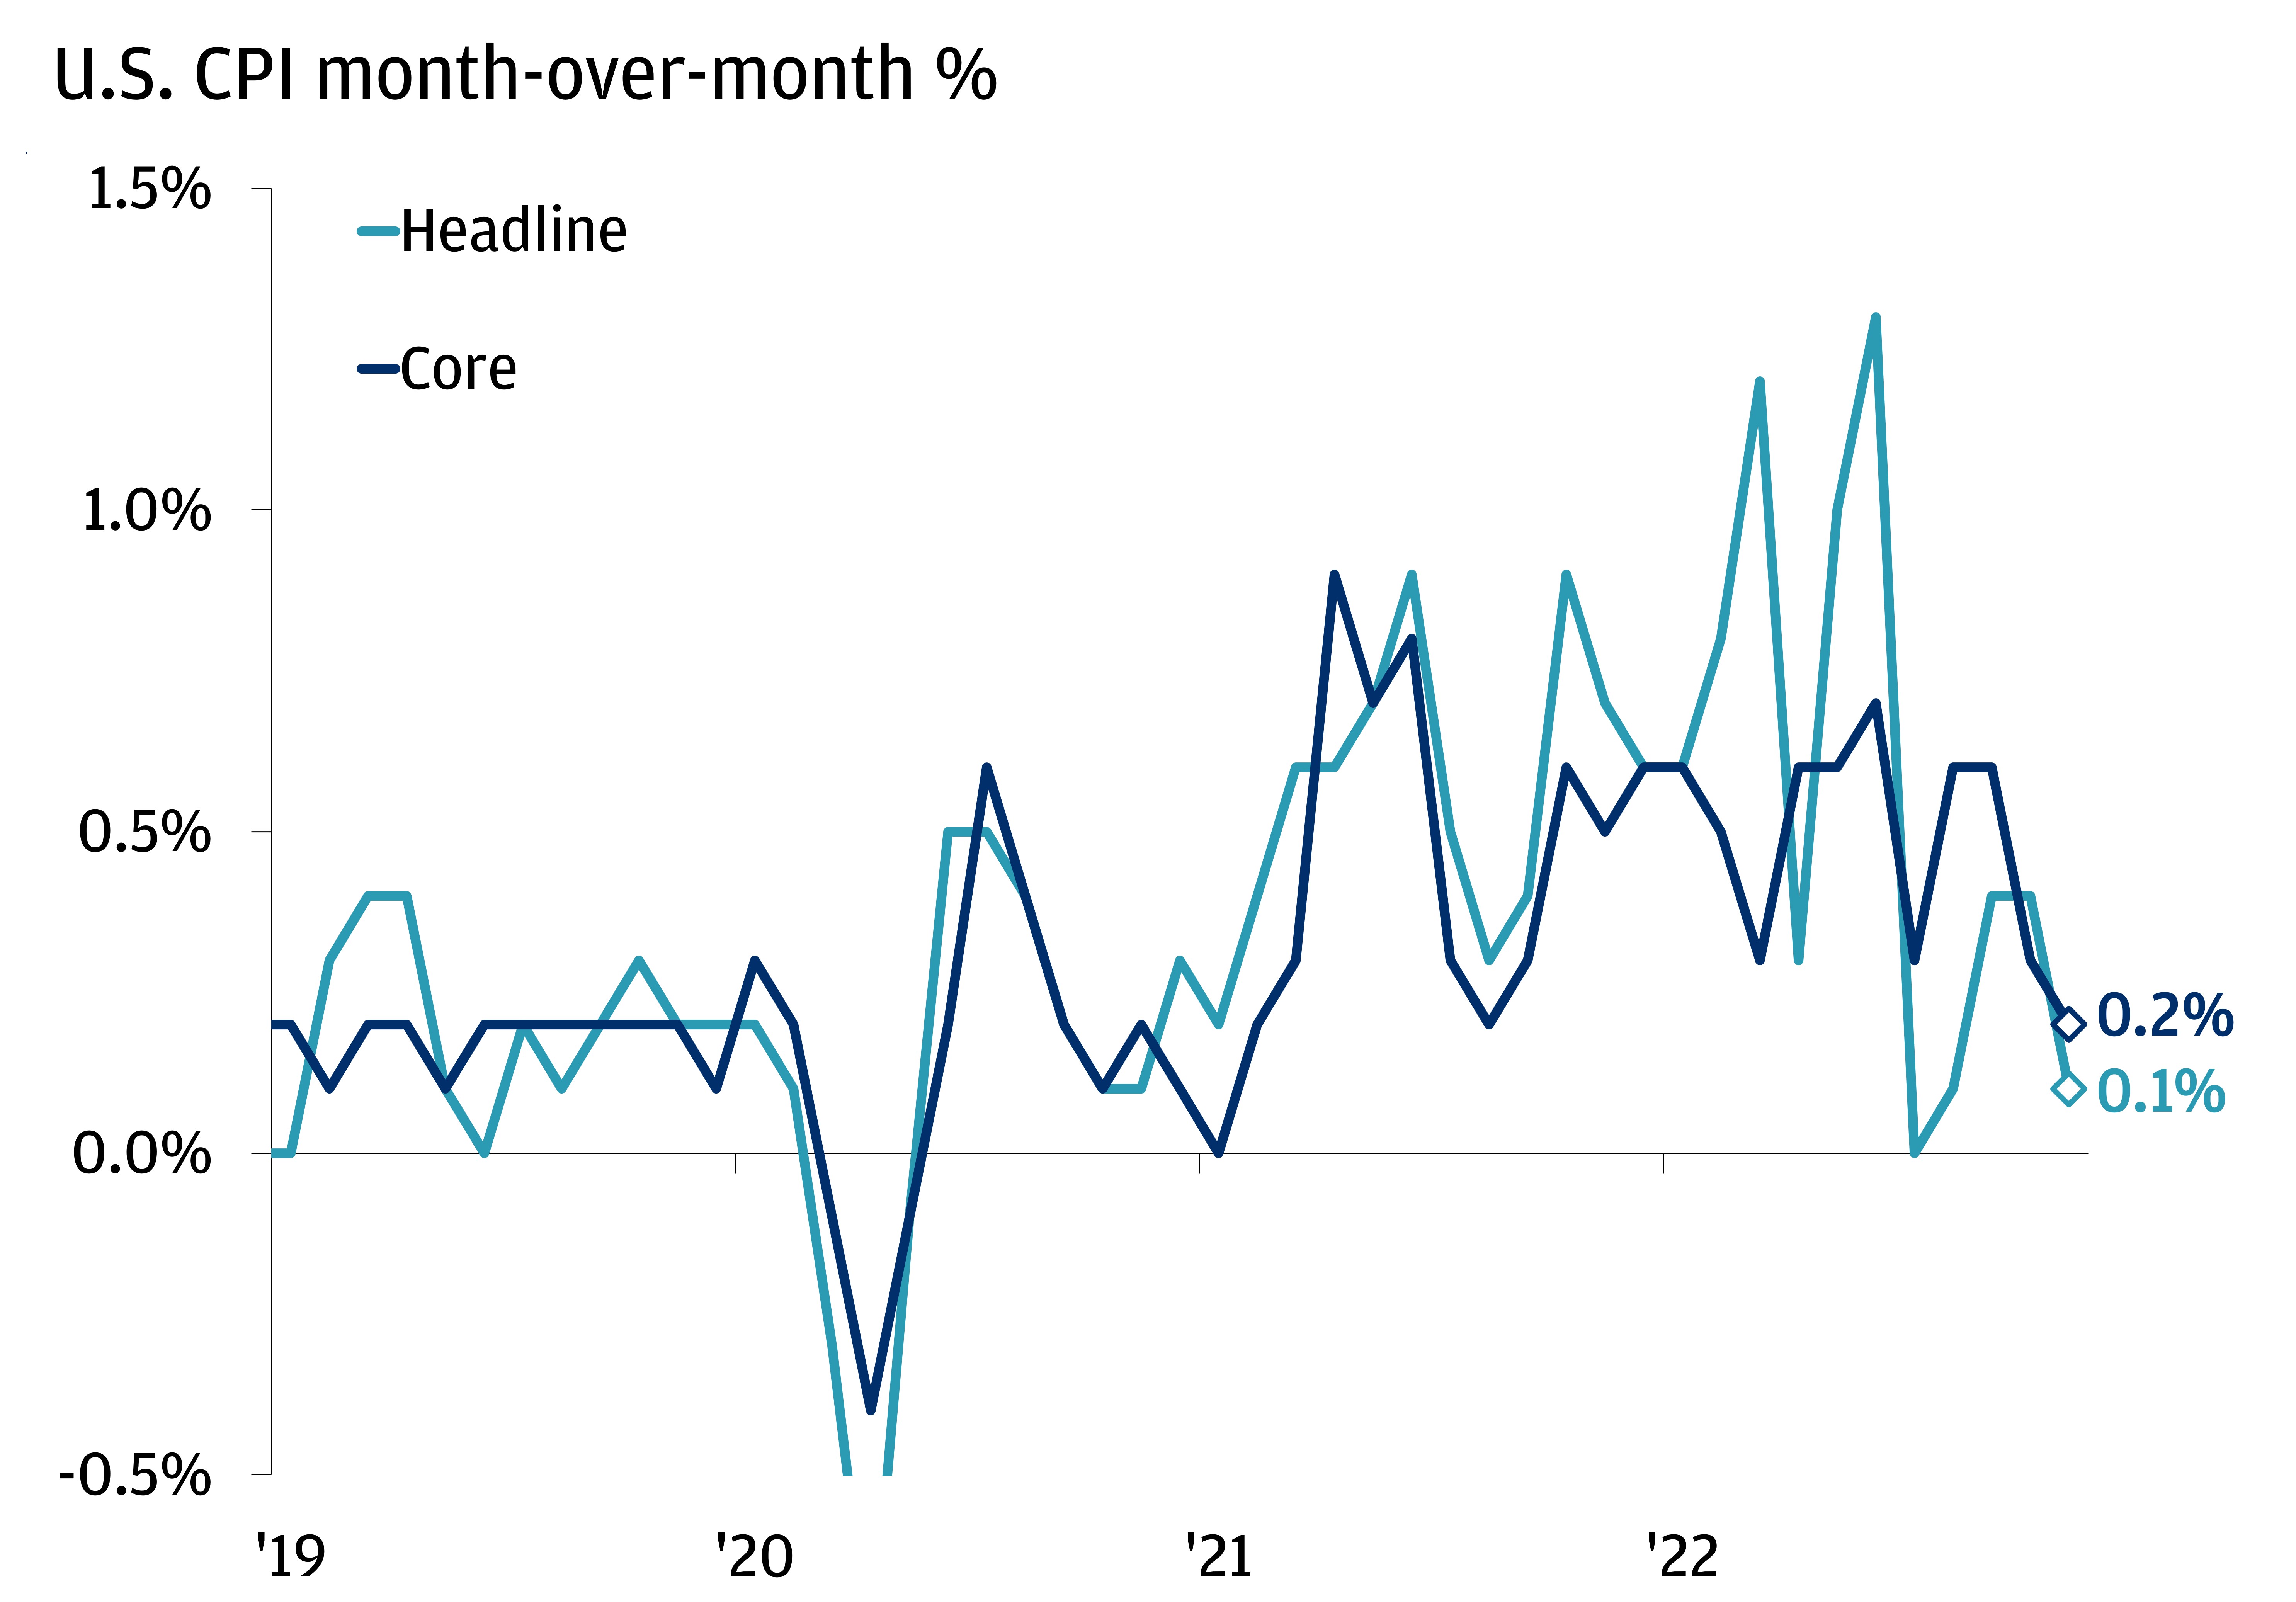 This graph shows the month-over-month change of U.S. headline and core CPI from January 2019 to November 2022.